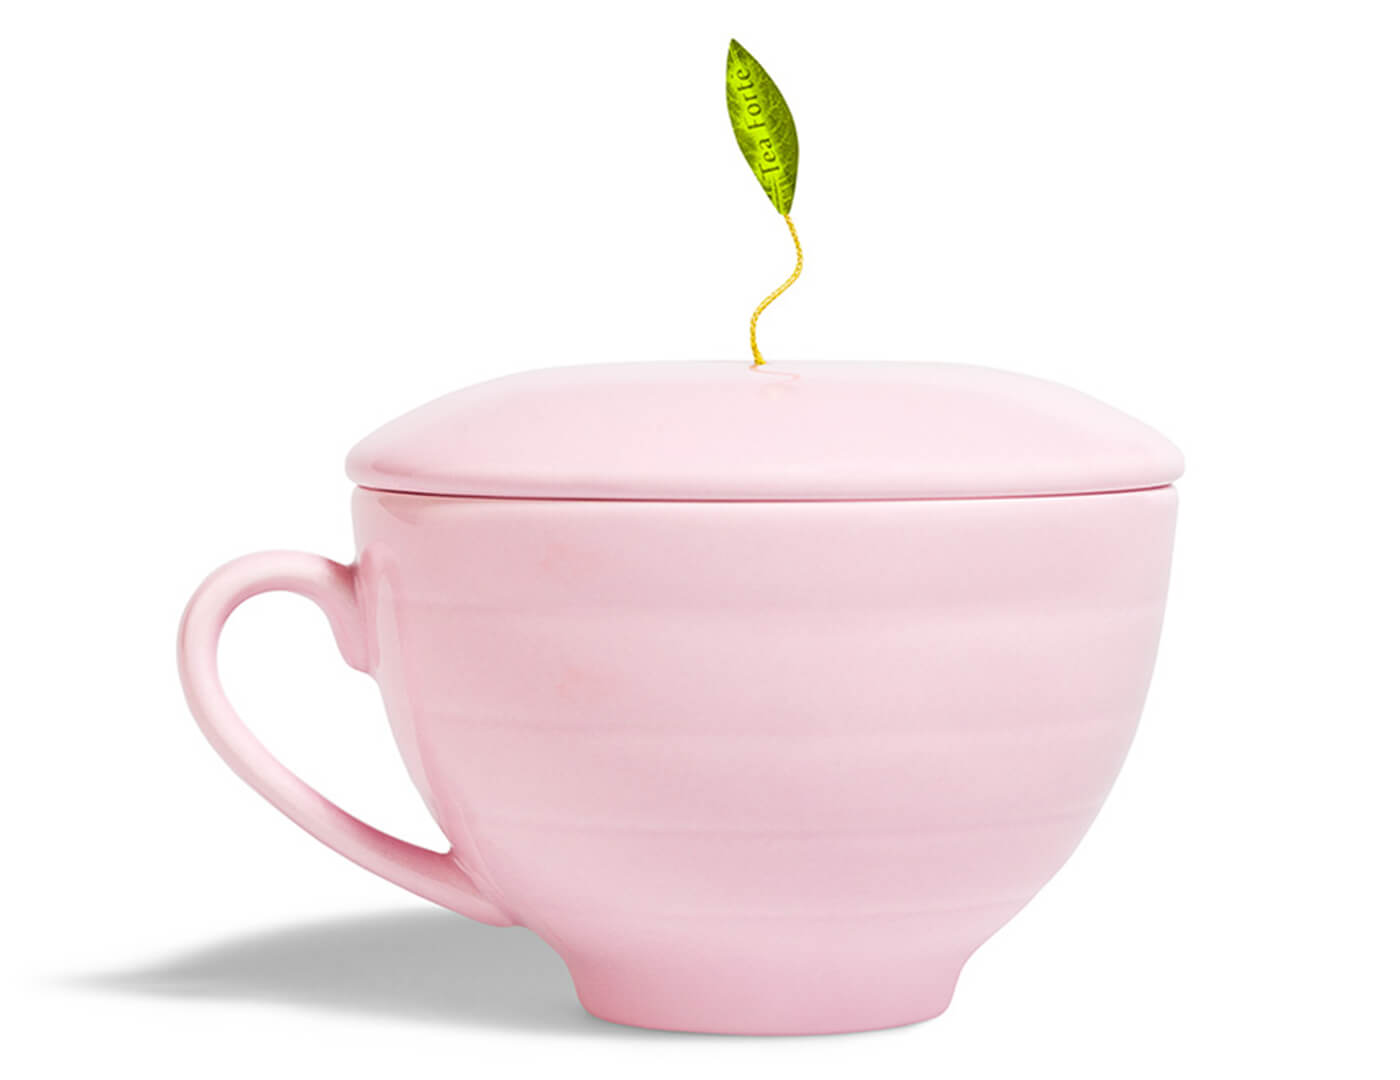 Rose Pink Café Cup with lid on top and pyramid infuser inside.